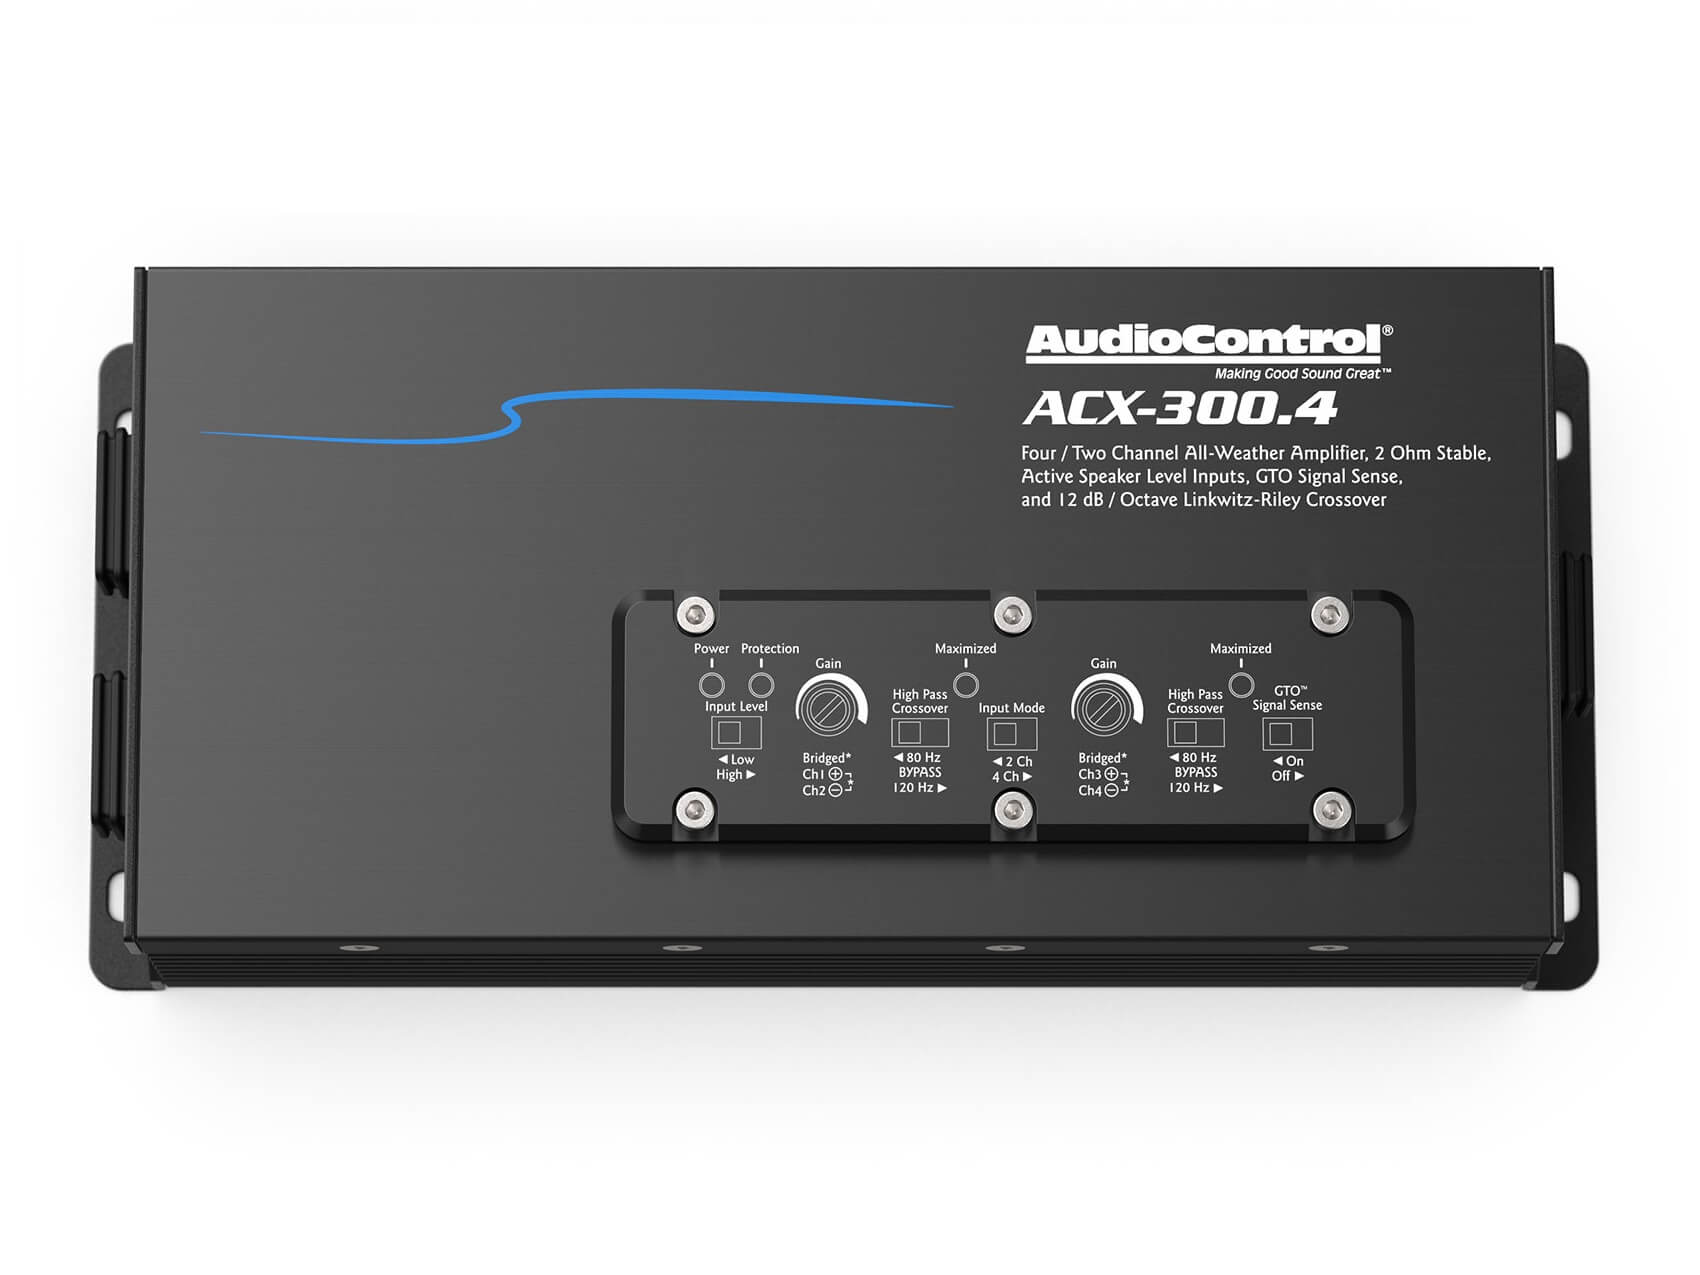 AudioControl ACX-300.4 - Top / With Cover